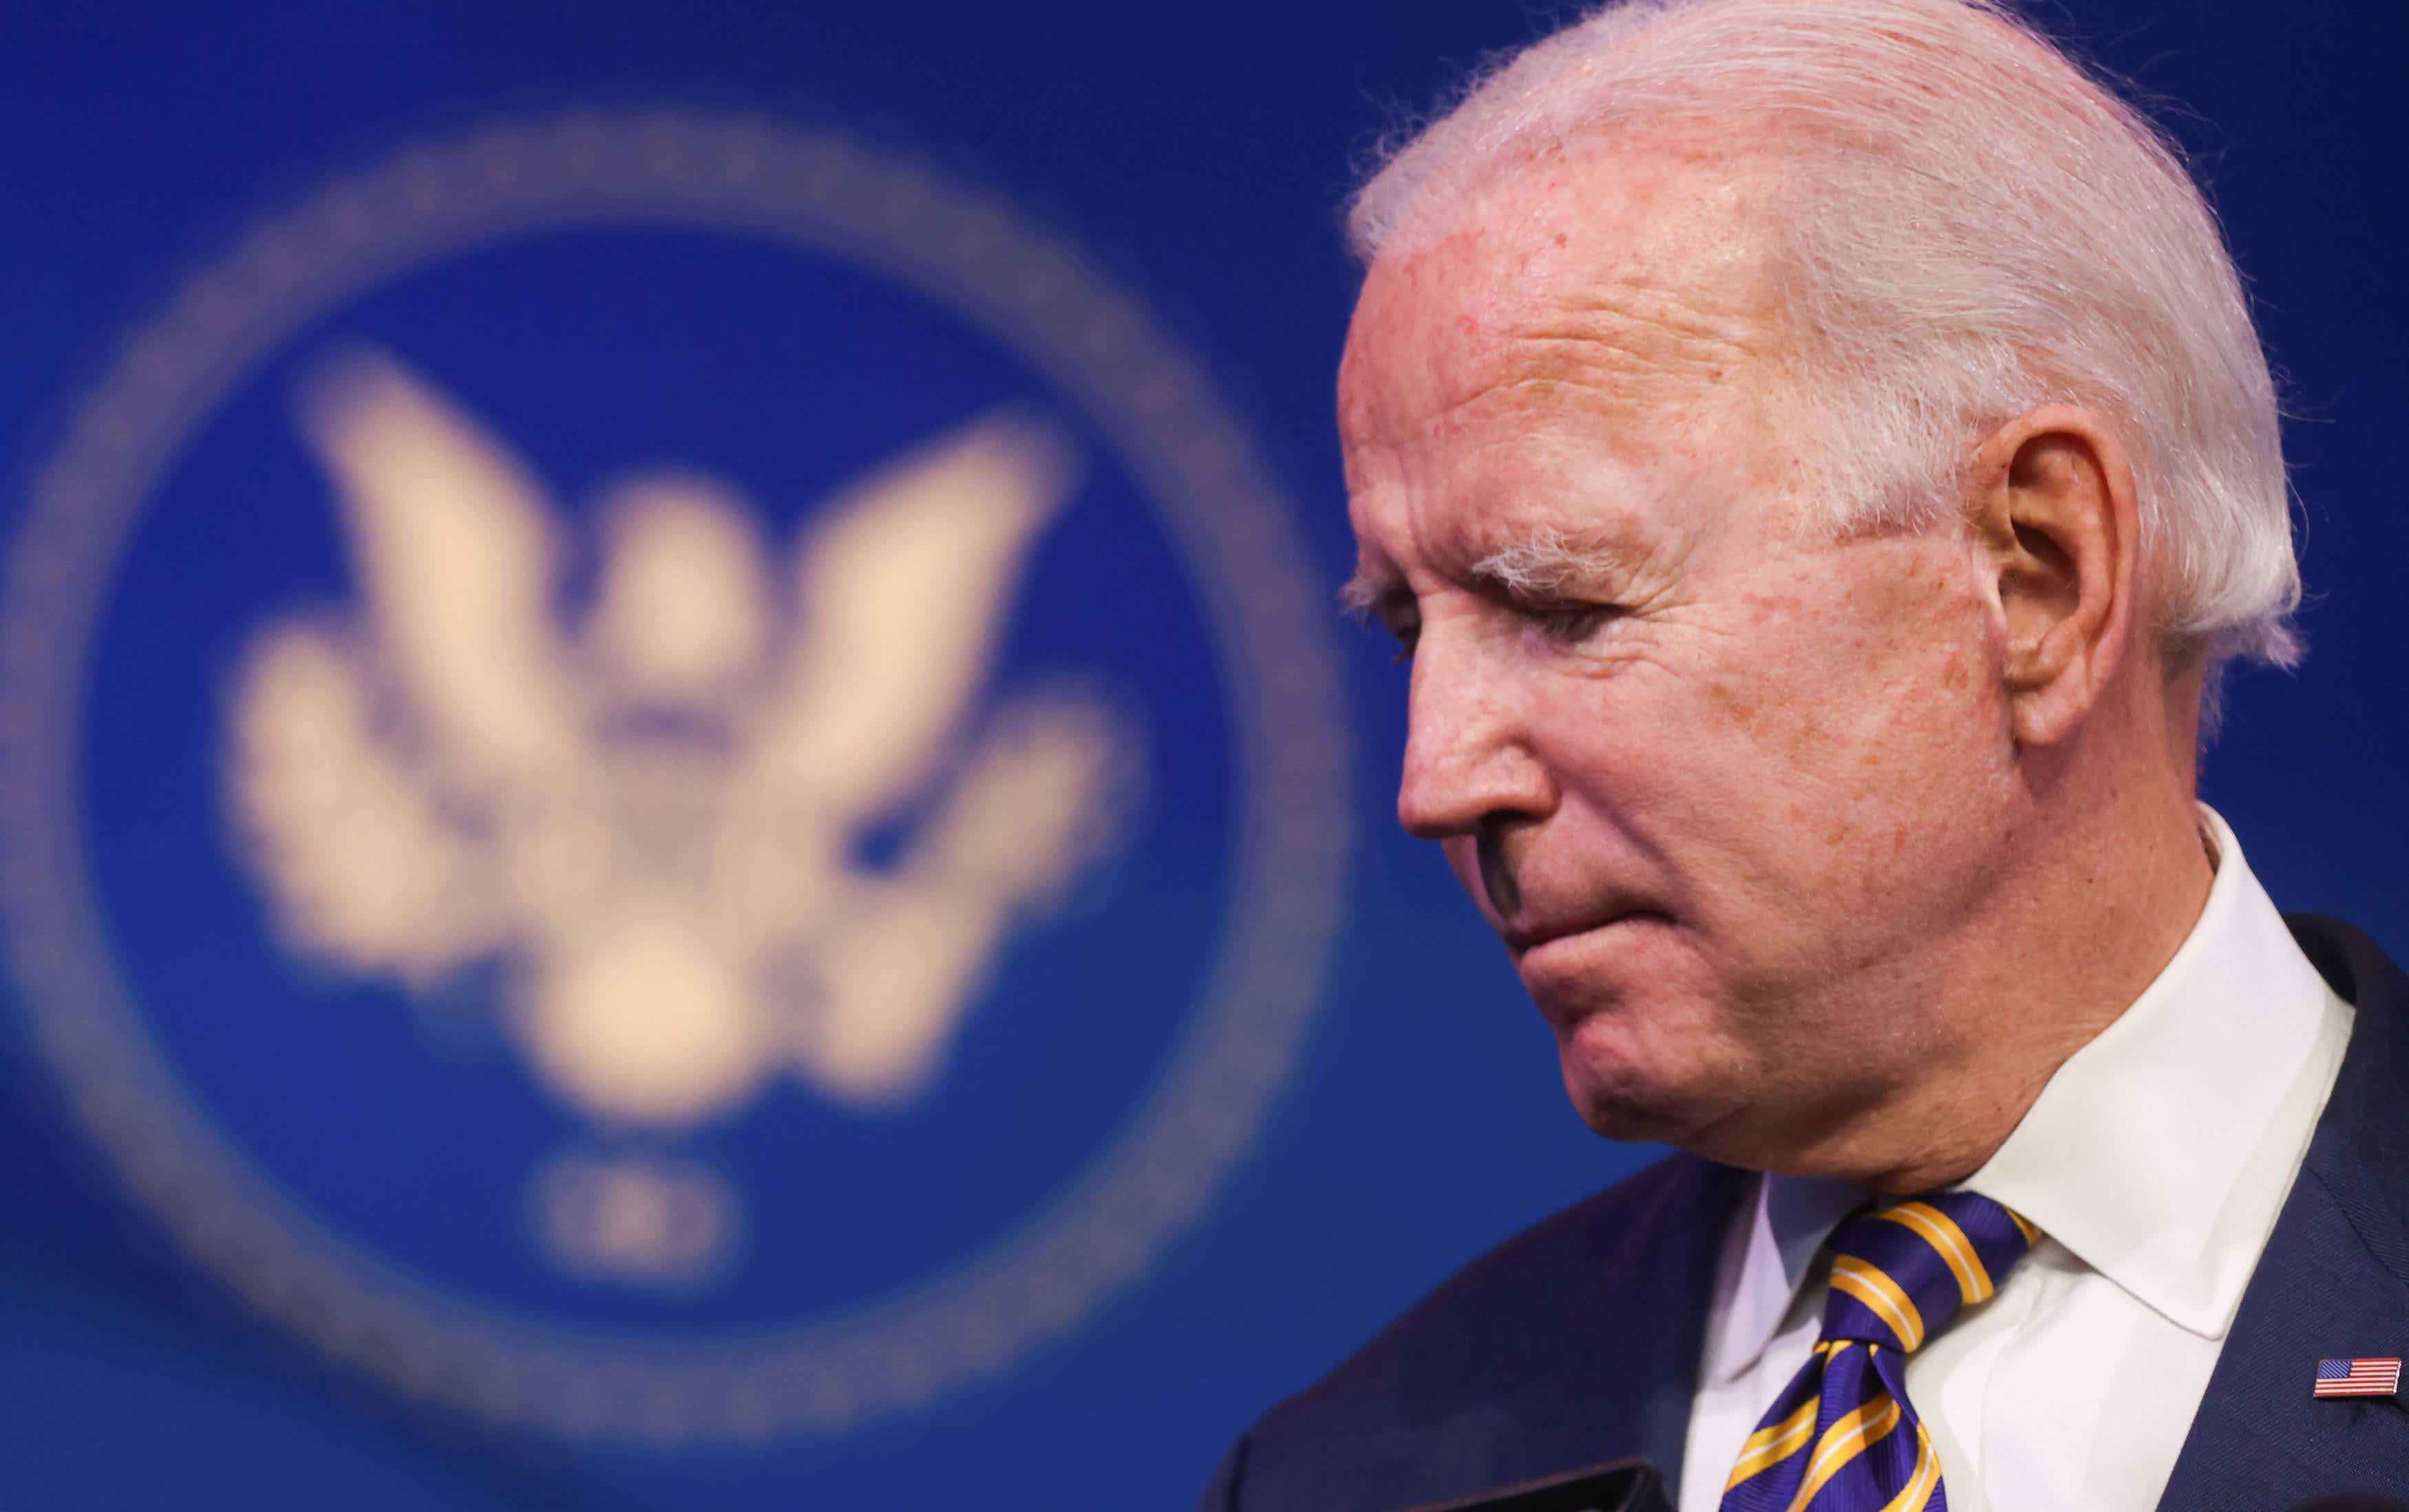 Biden says Iran should return to nuclear deal before sanction eases